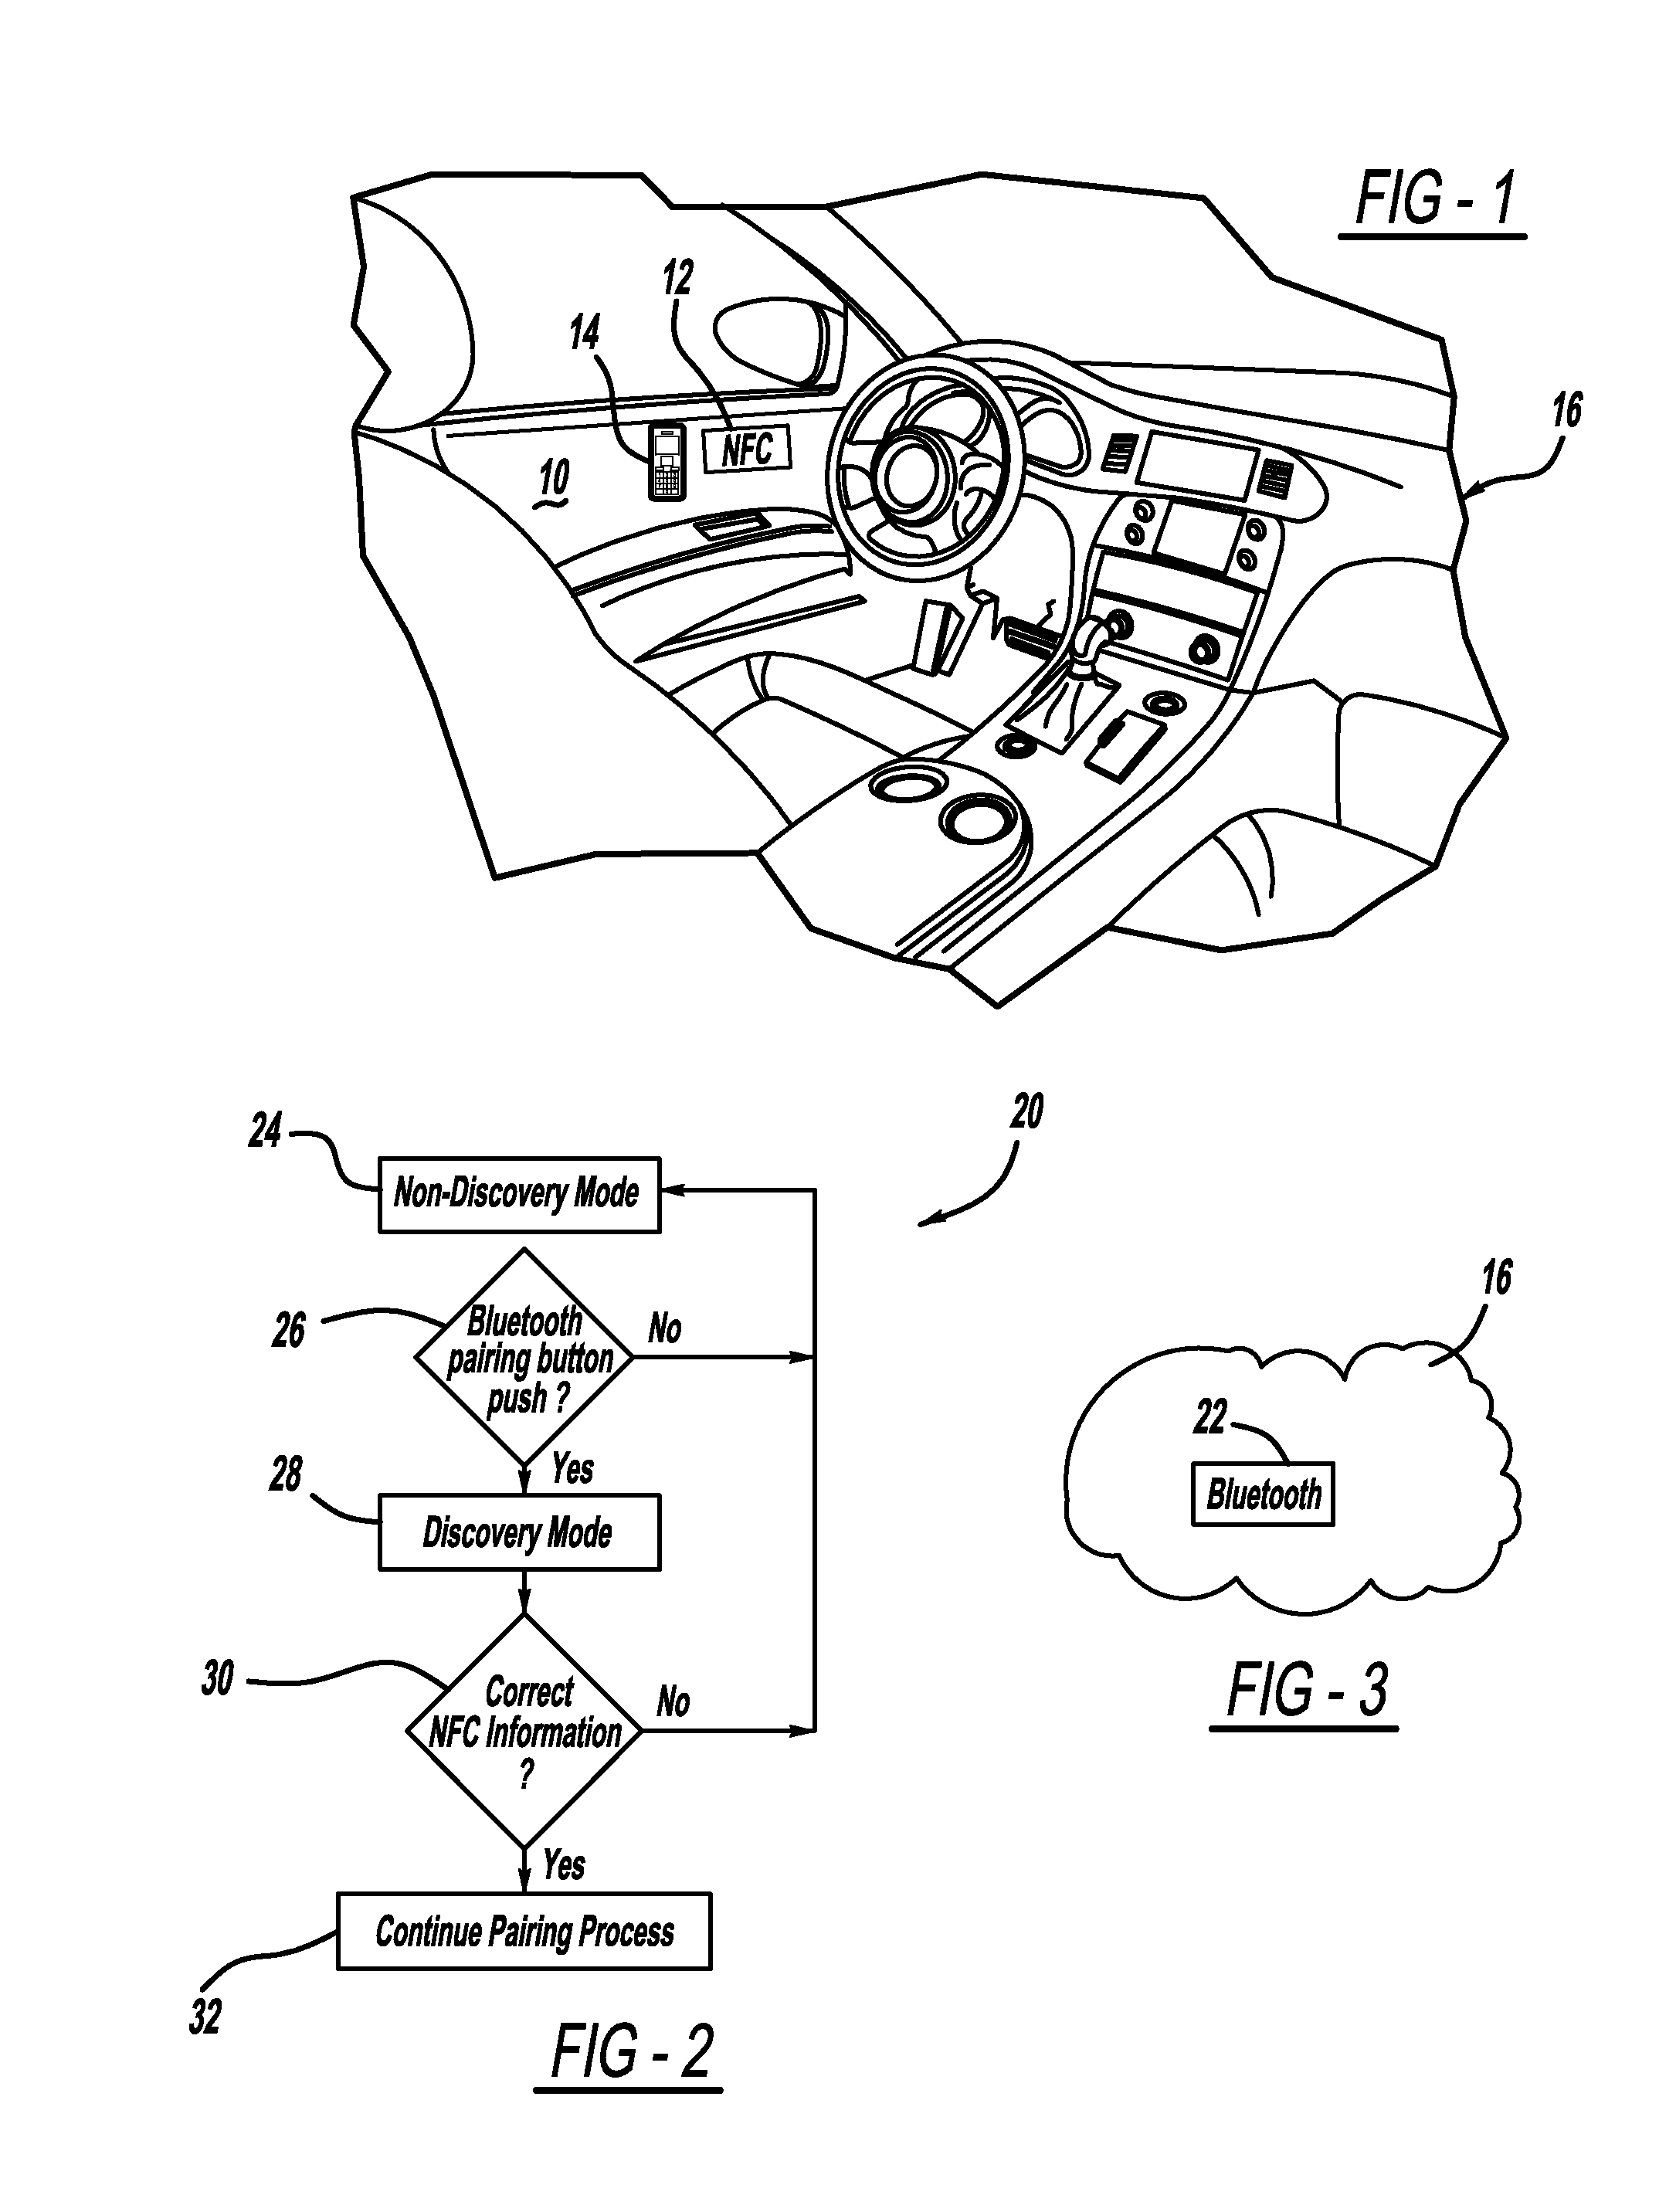 Simplified vehicle bluetooth pairing employing near field communication tags